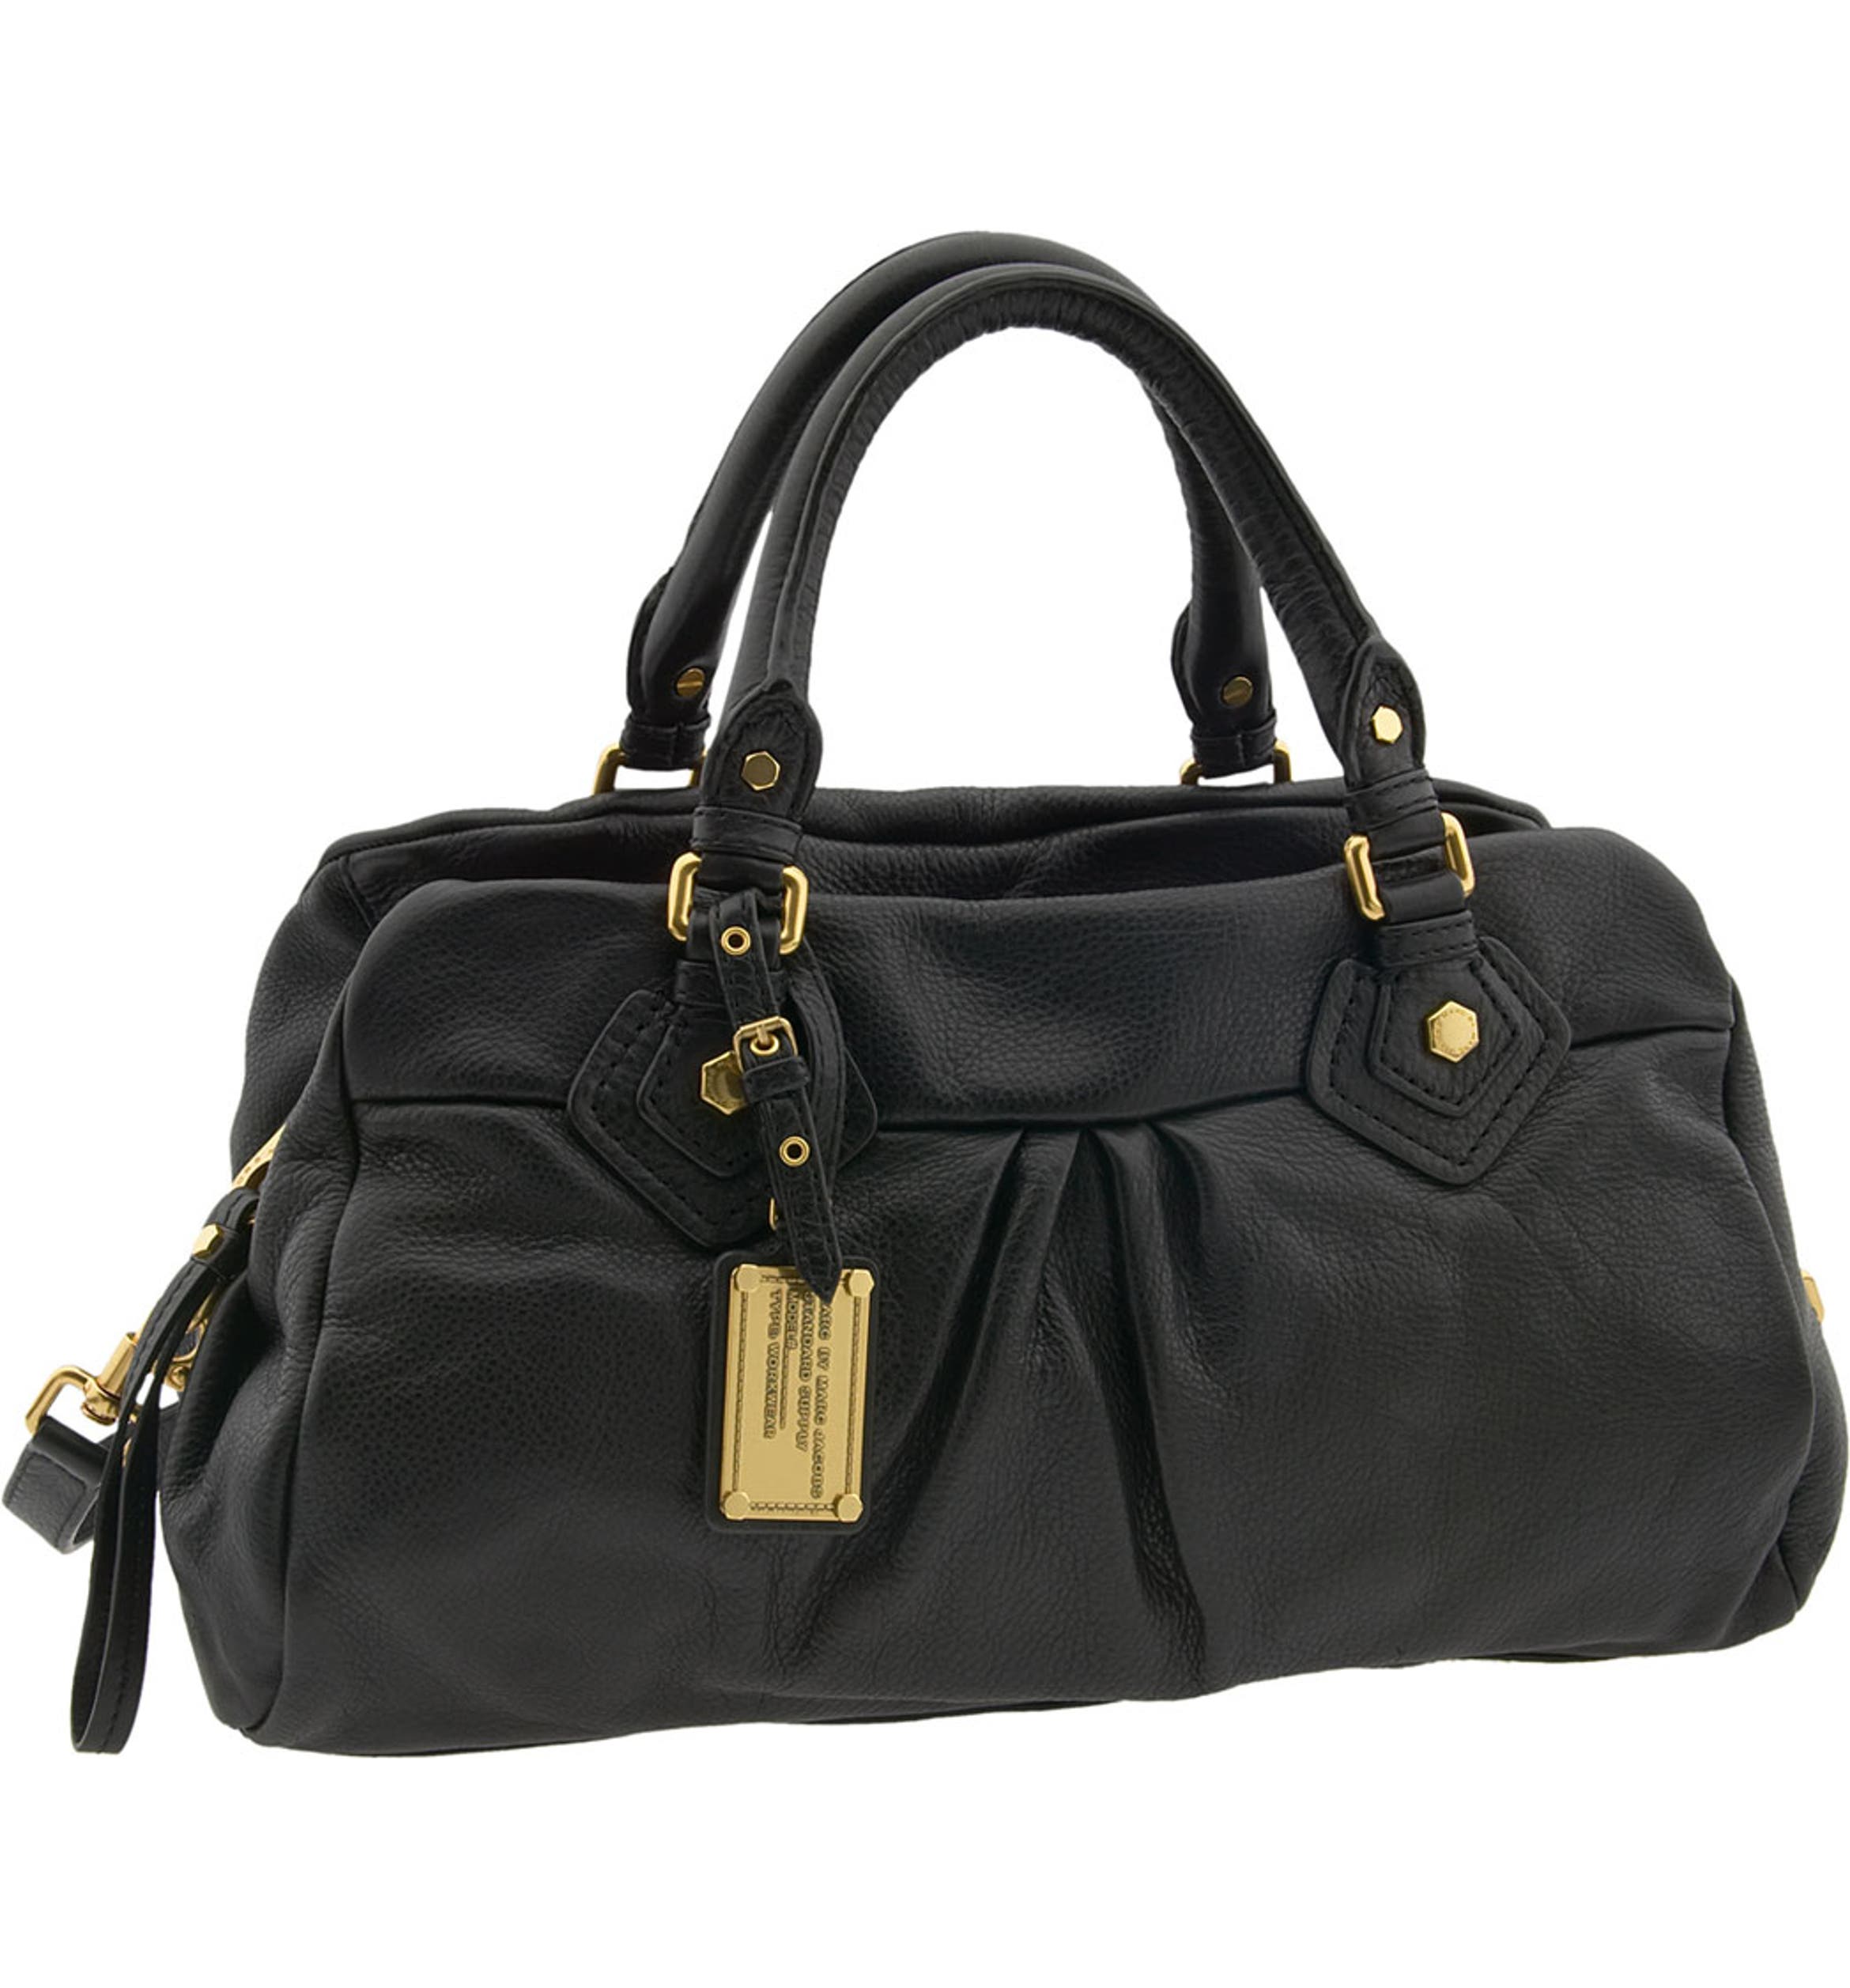 MARC BY MARC JACOBS 'Classic Q - Groovee' Satchel | Nordstrom